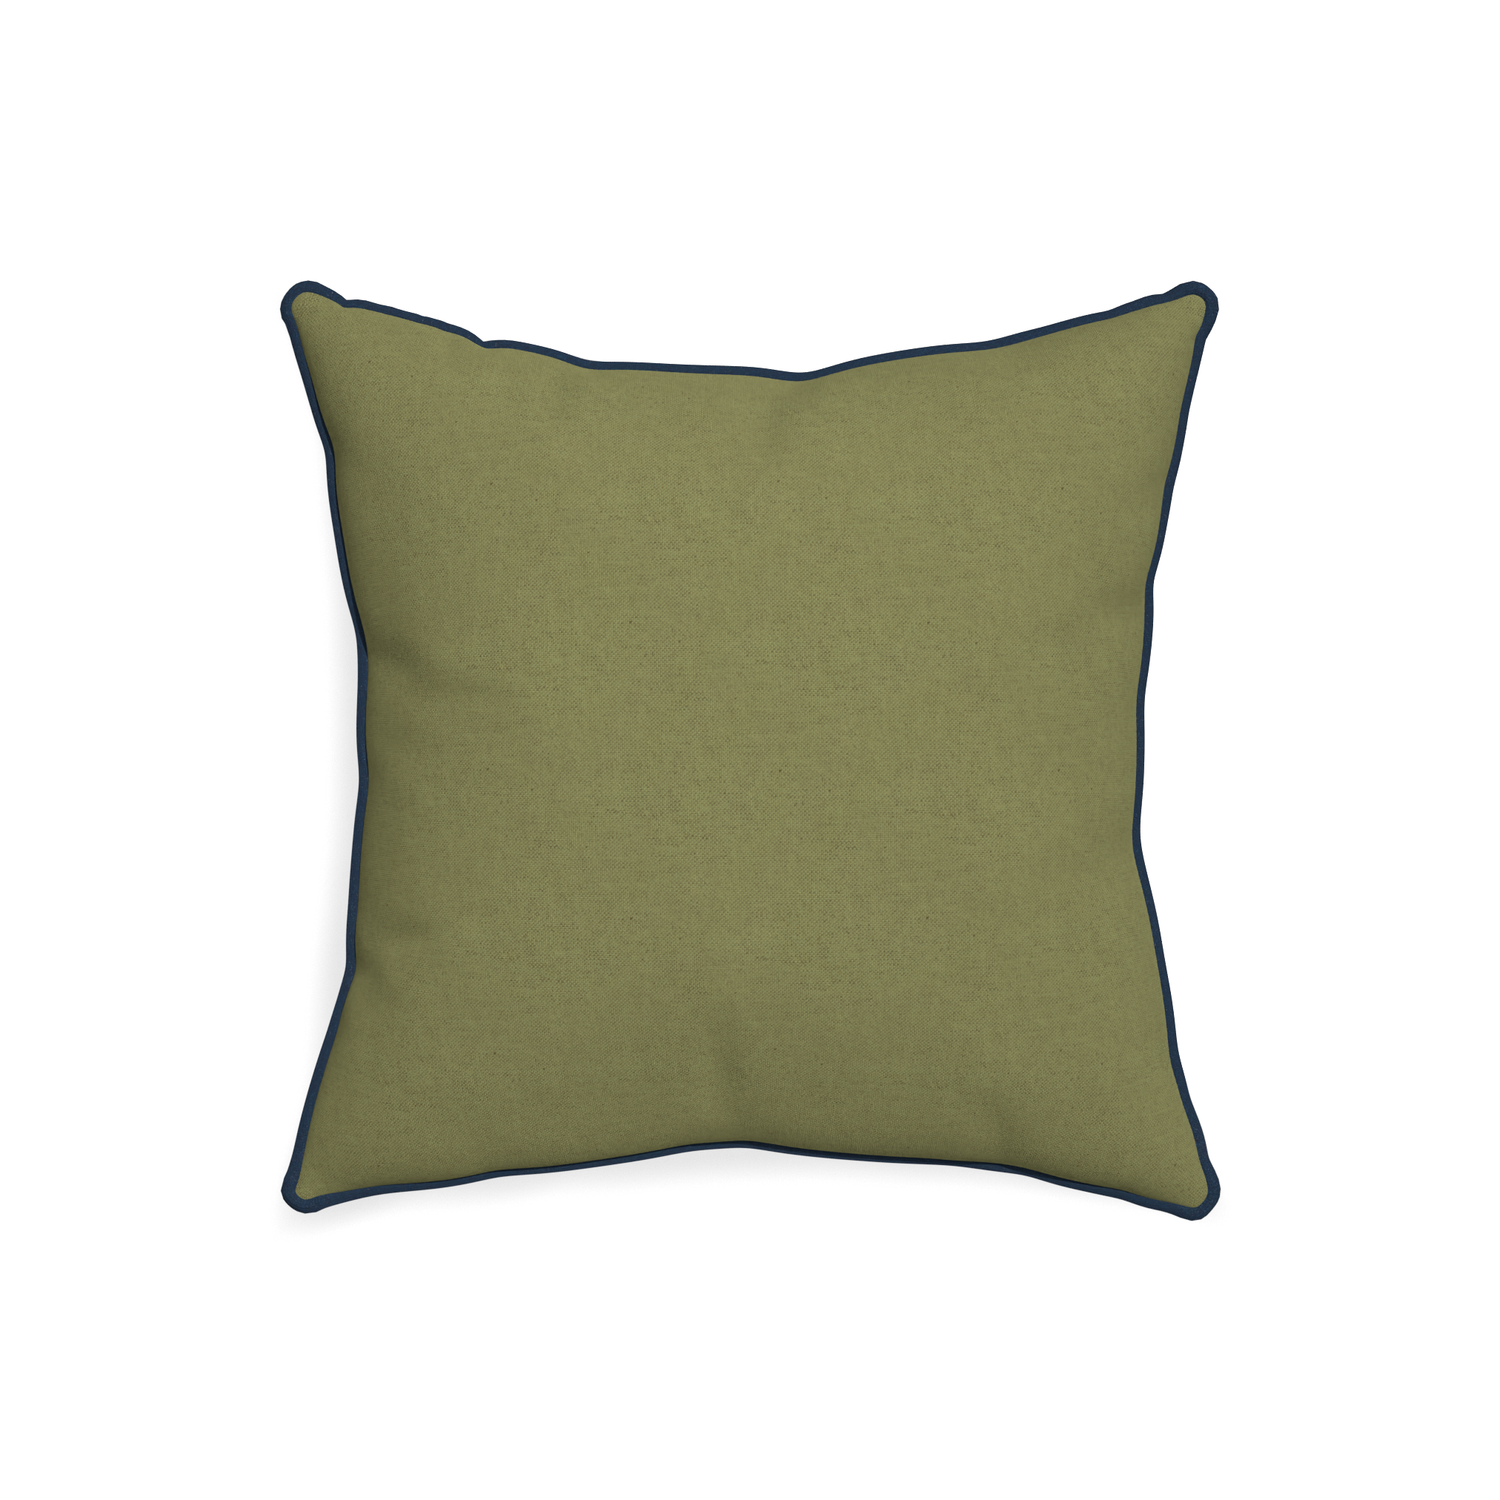 20-square moss custom moss greenpillow with c piping on white background